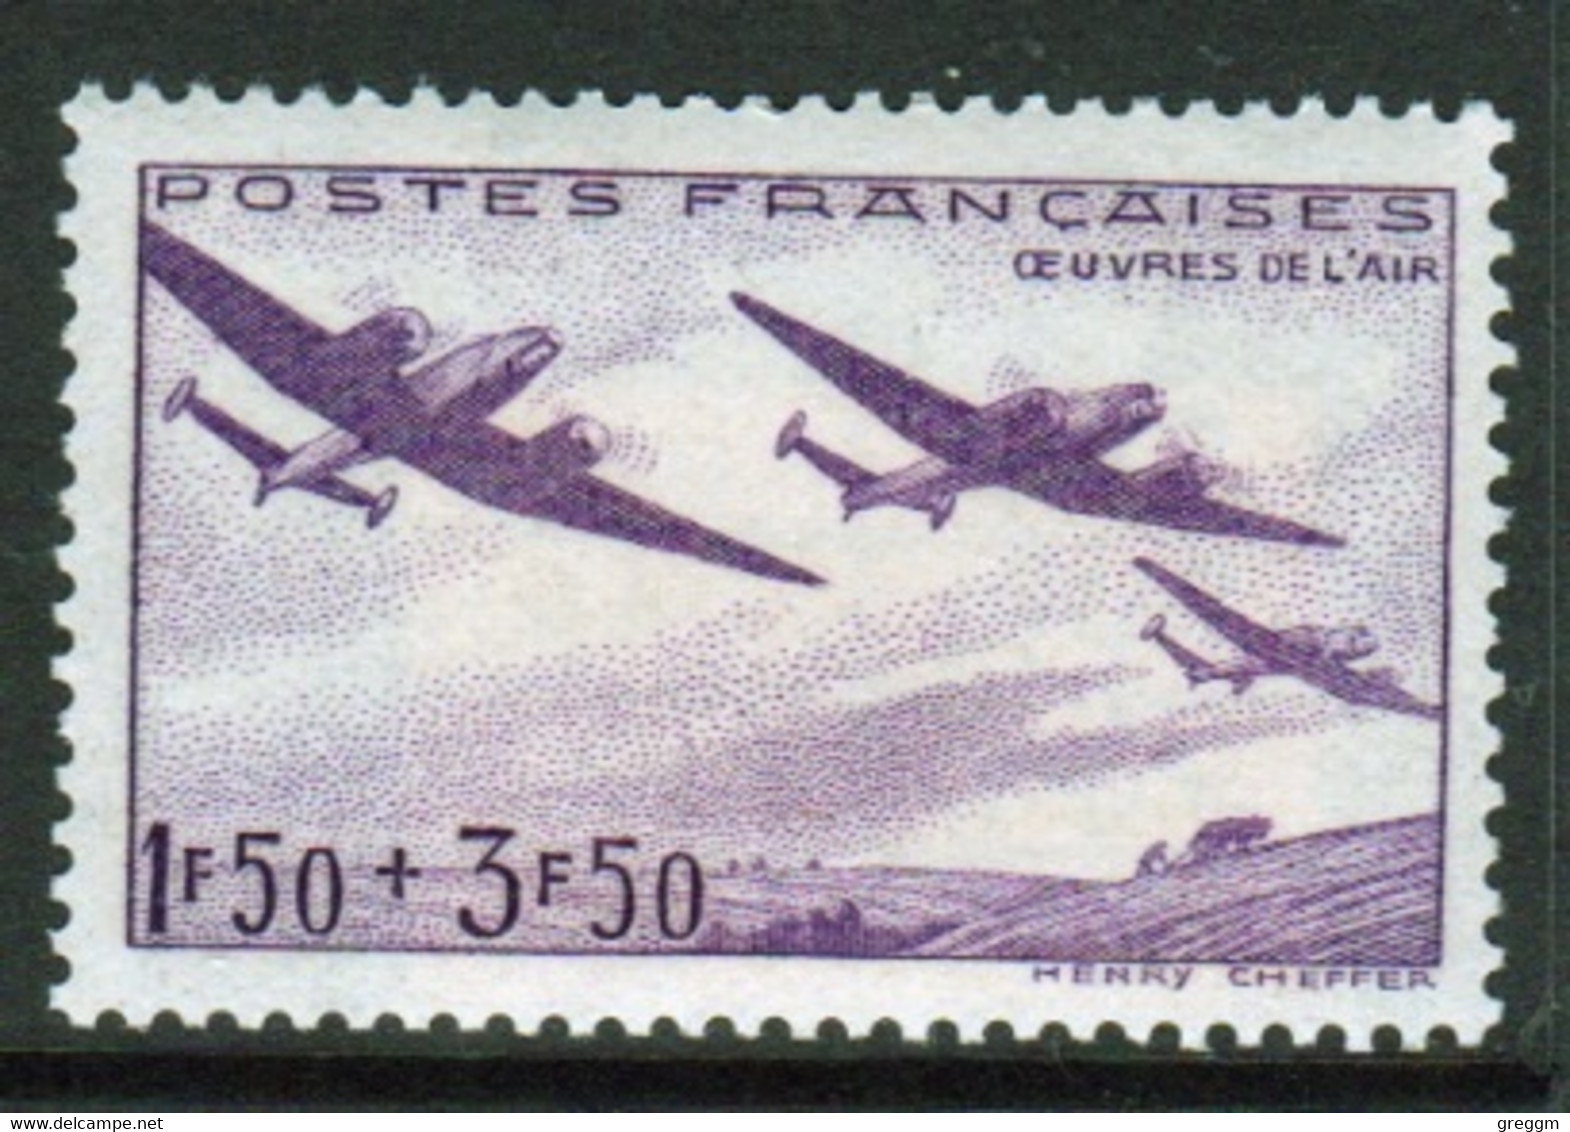 France 1942 Single Stamp Showing Planes Flying Overhead In Unmounted Mint - Neufs